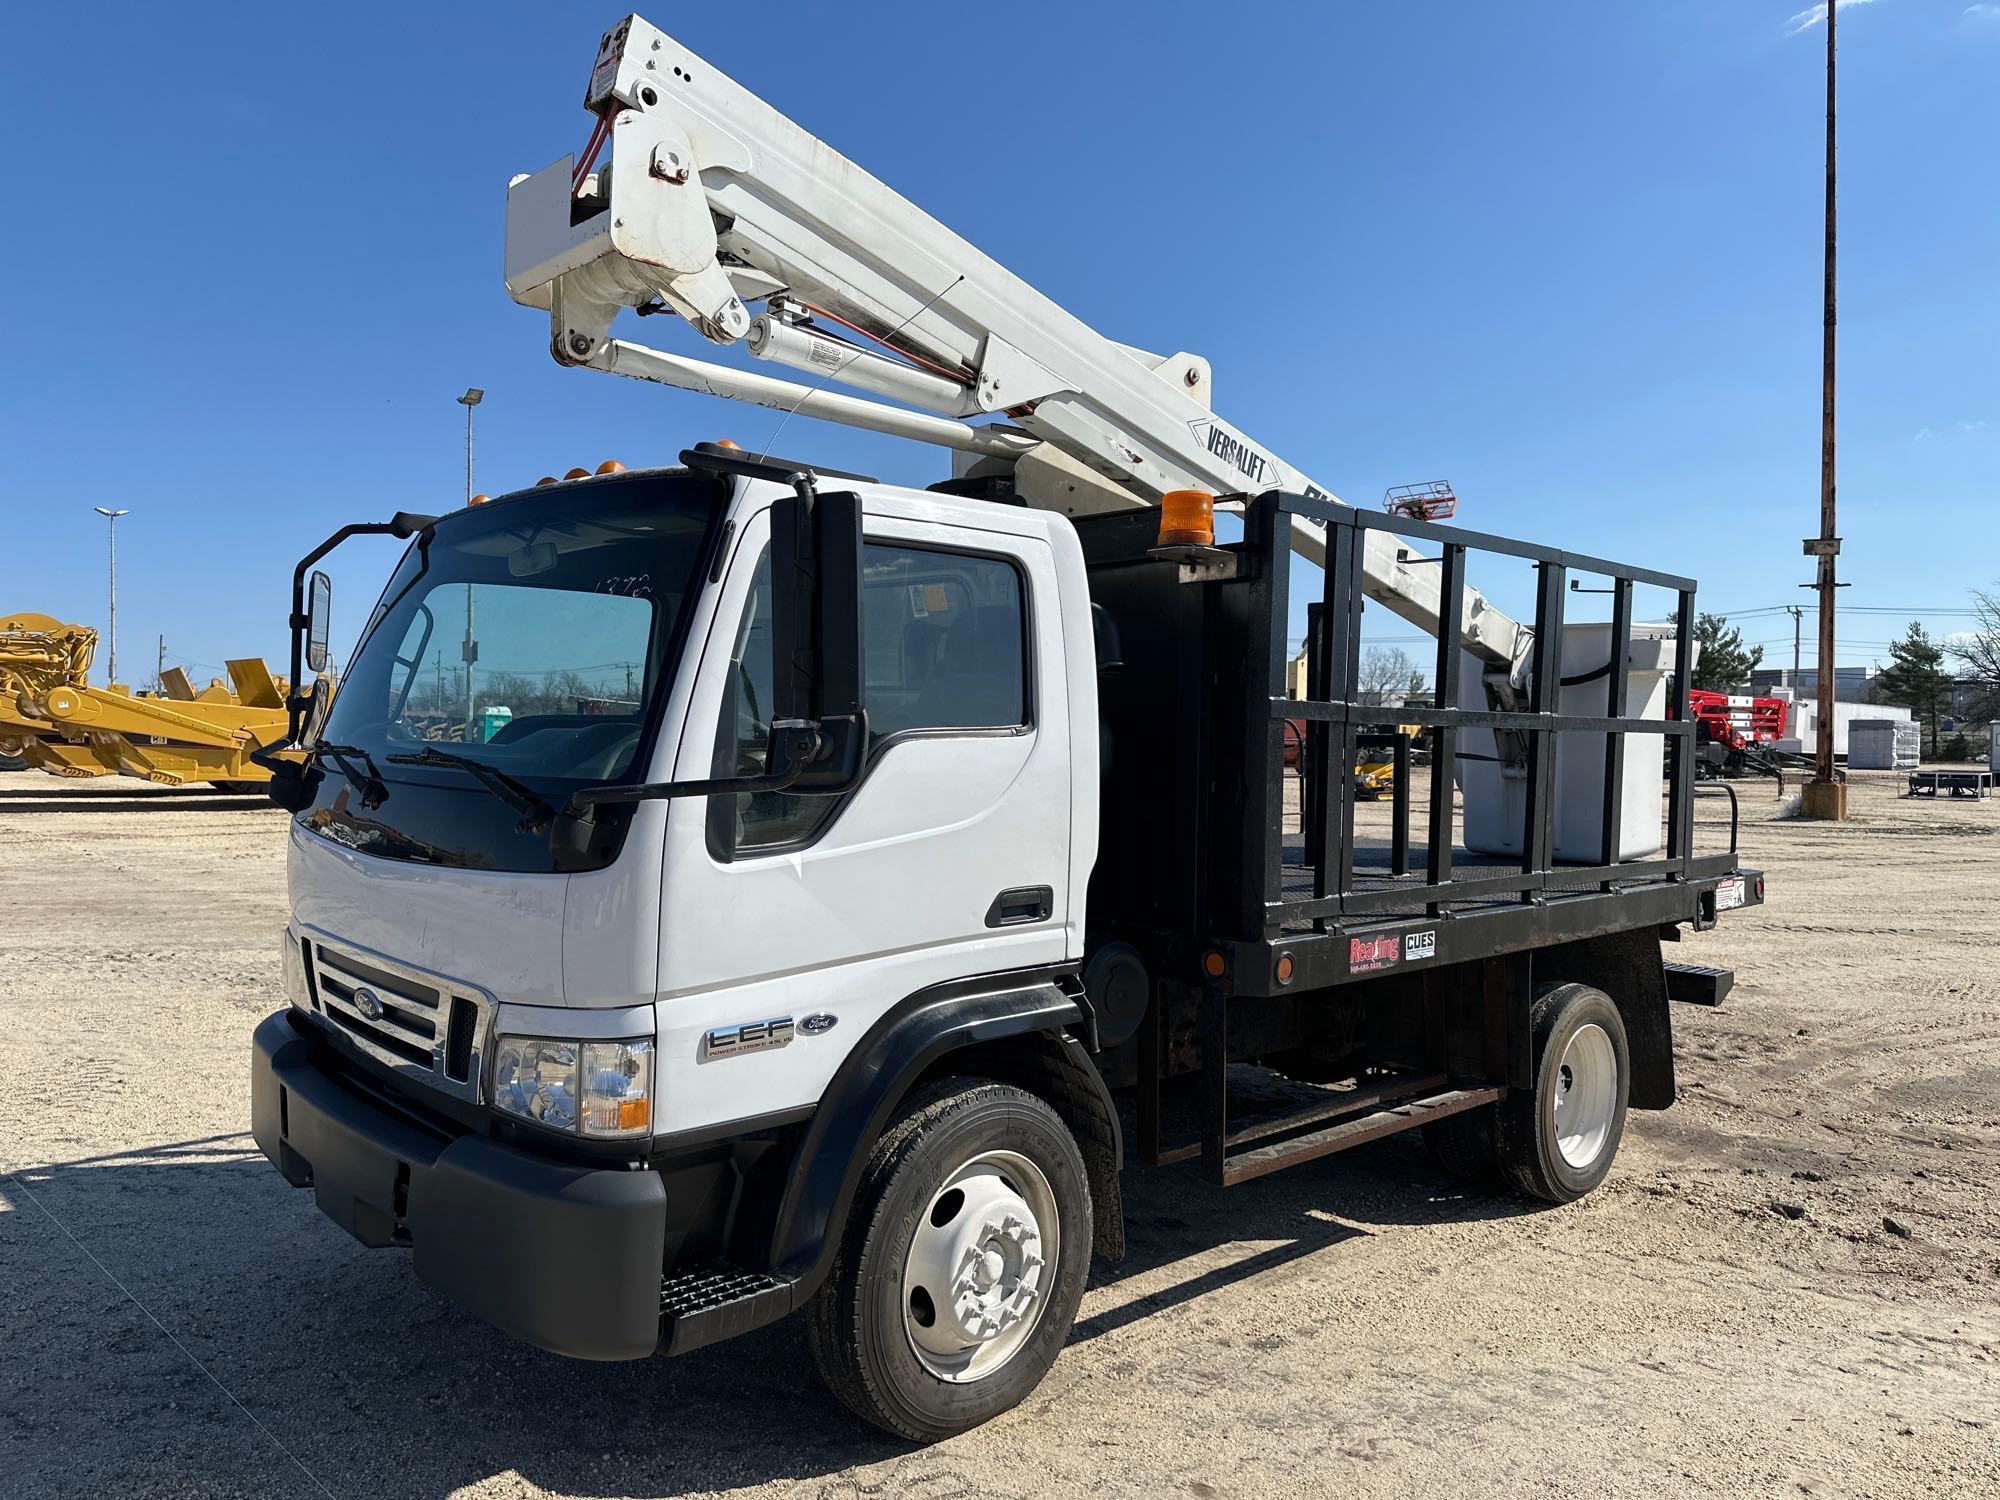 2006 FORD LCF BUCKET TRUCK VN:3FRML55Z16V413142 powered by 4.5L 6 cylinder diesel engine, equipped